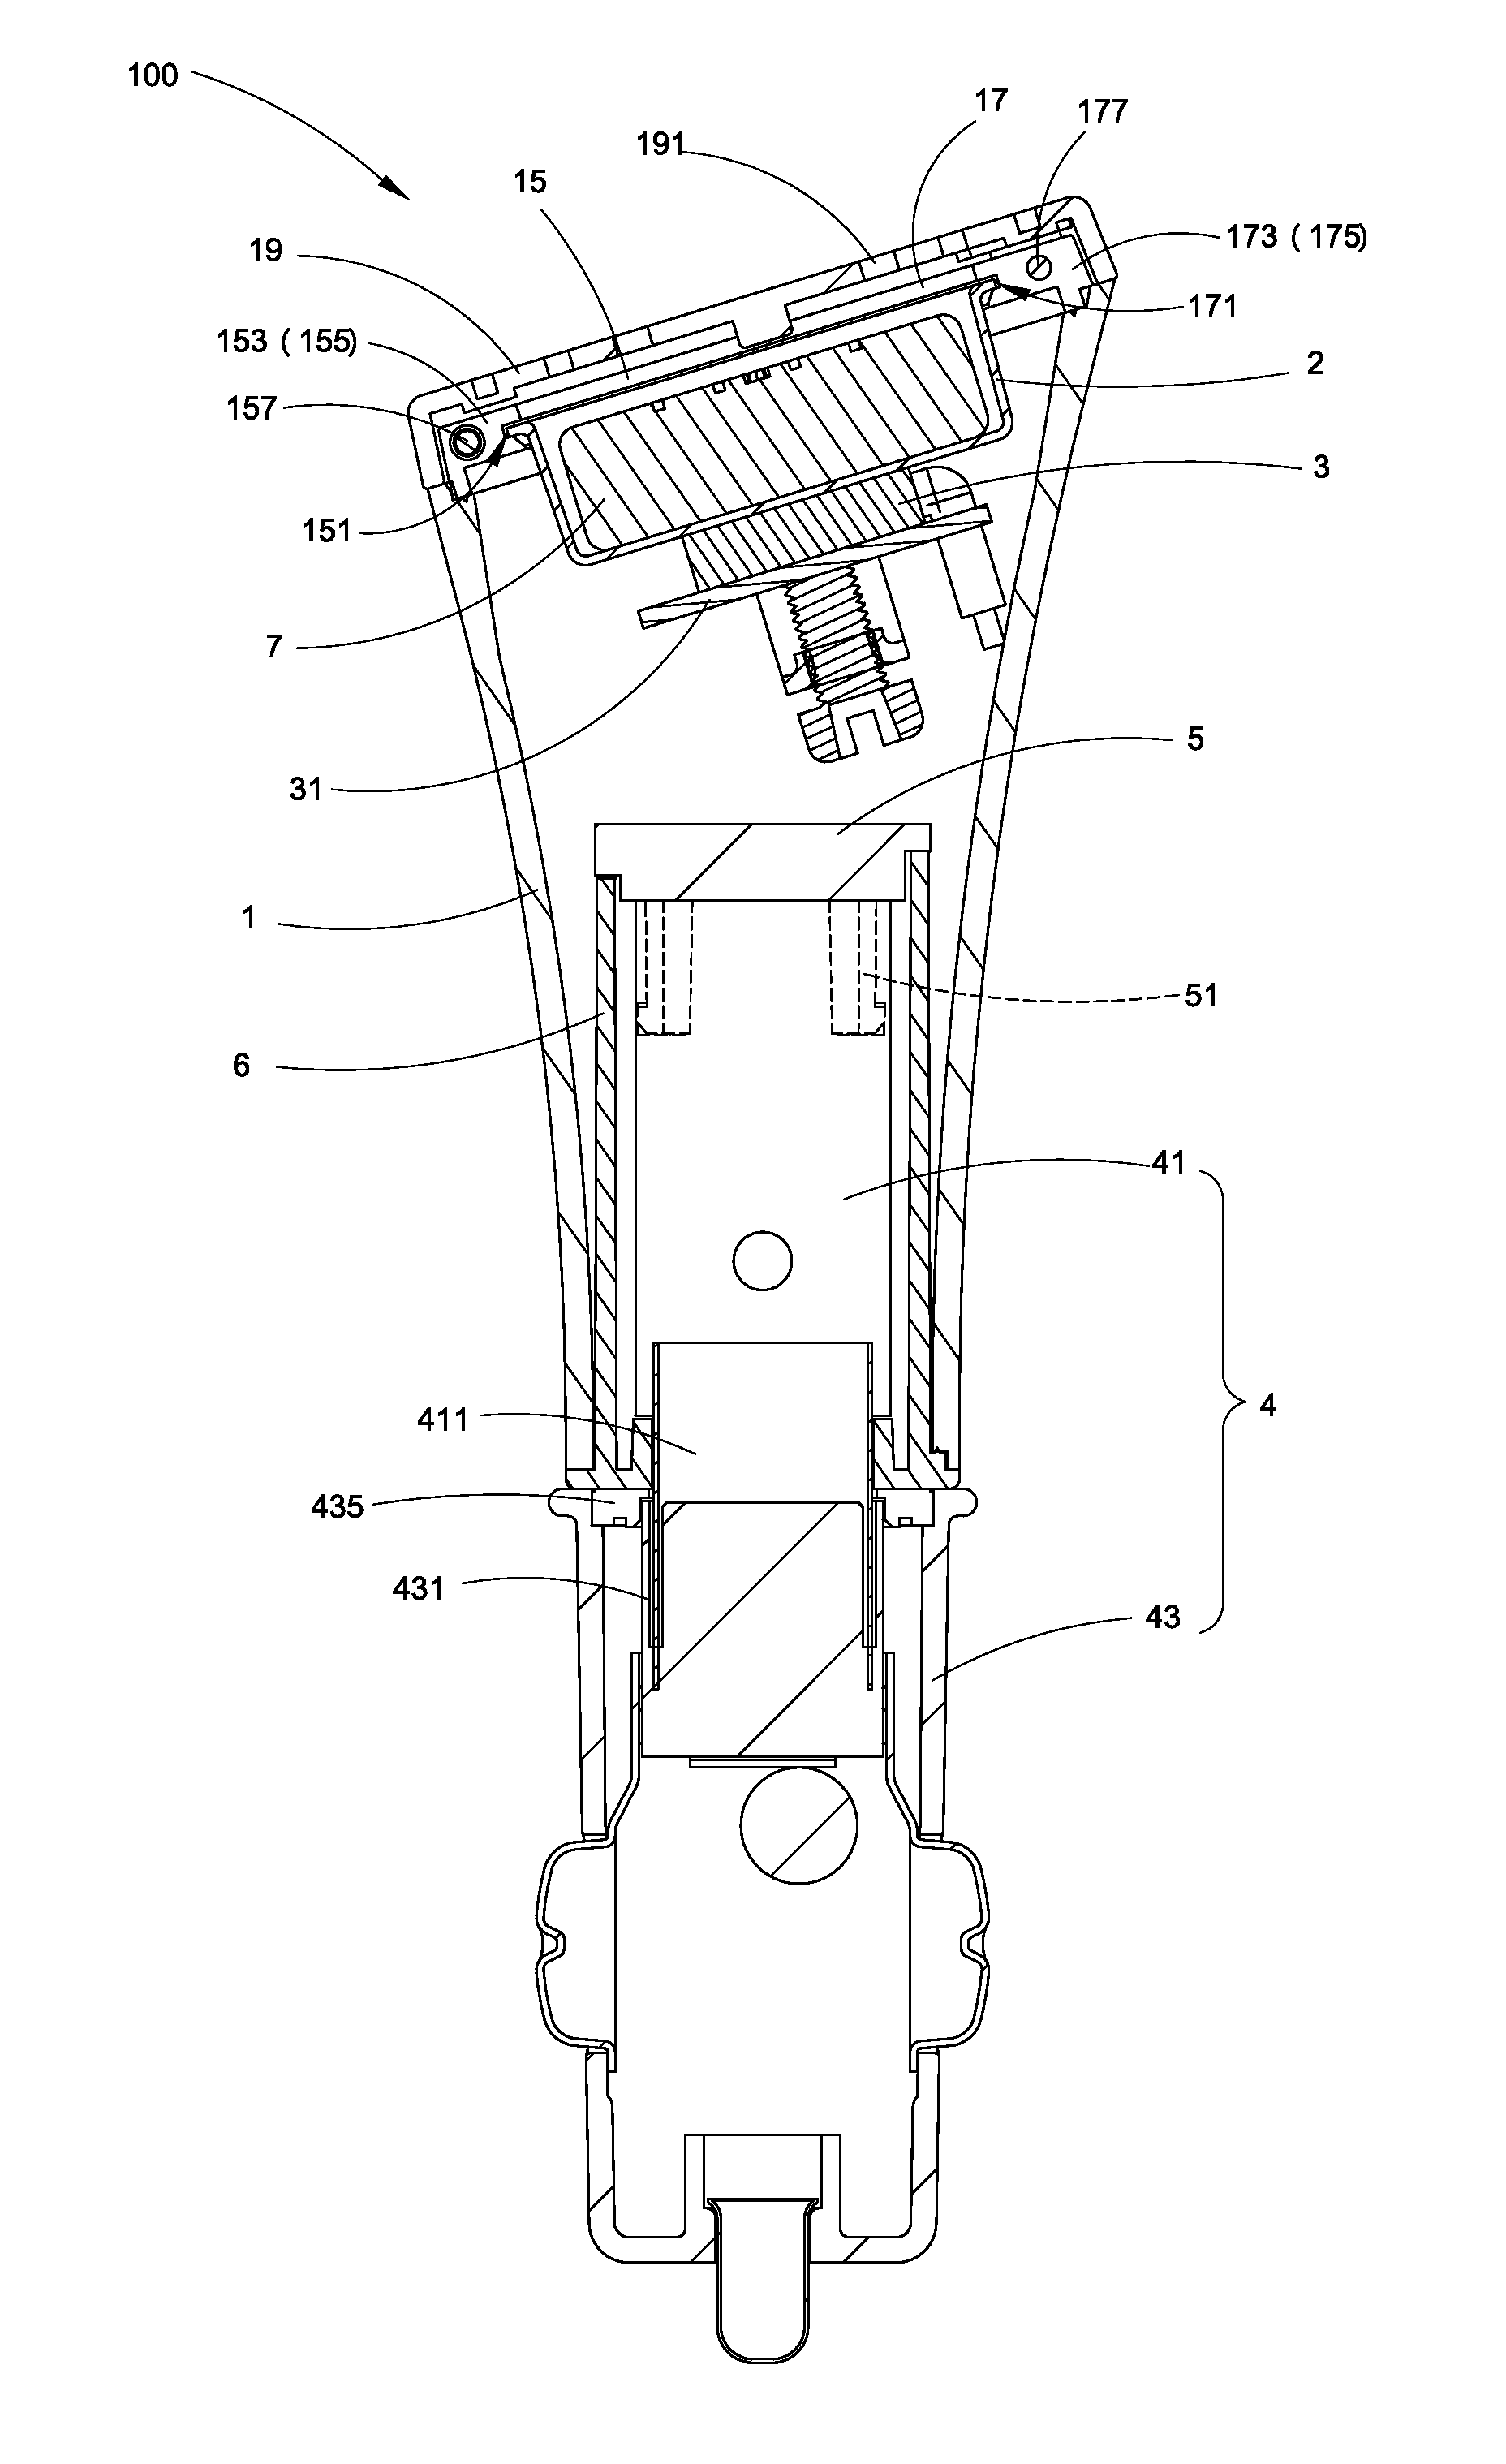 Aroma diffuser having a variable plugging device using an aroma stone